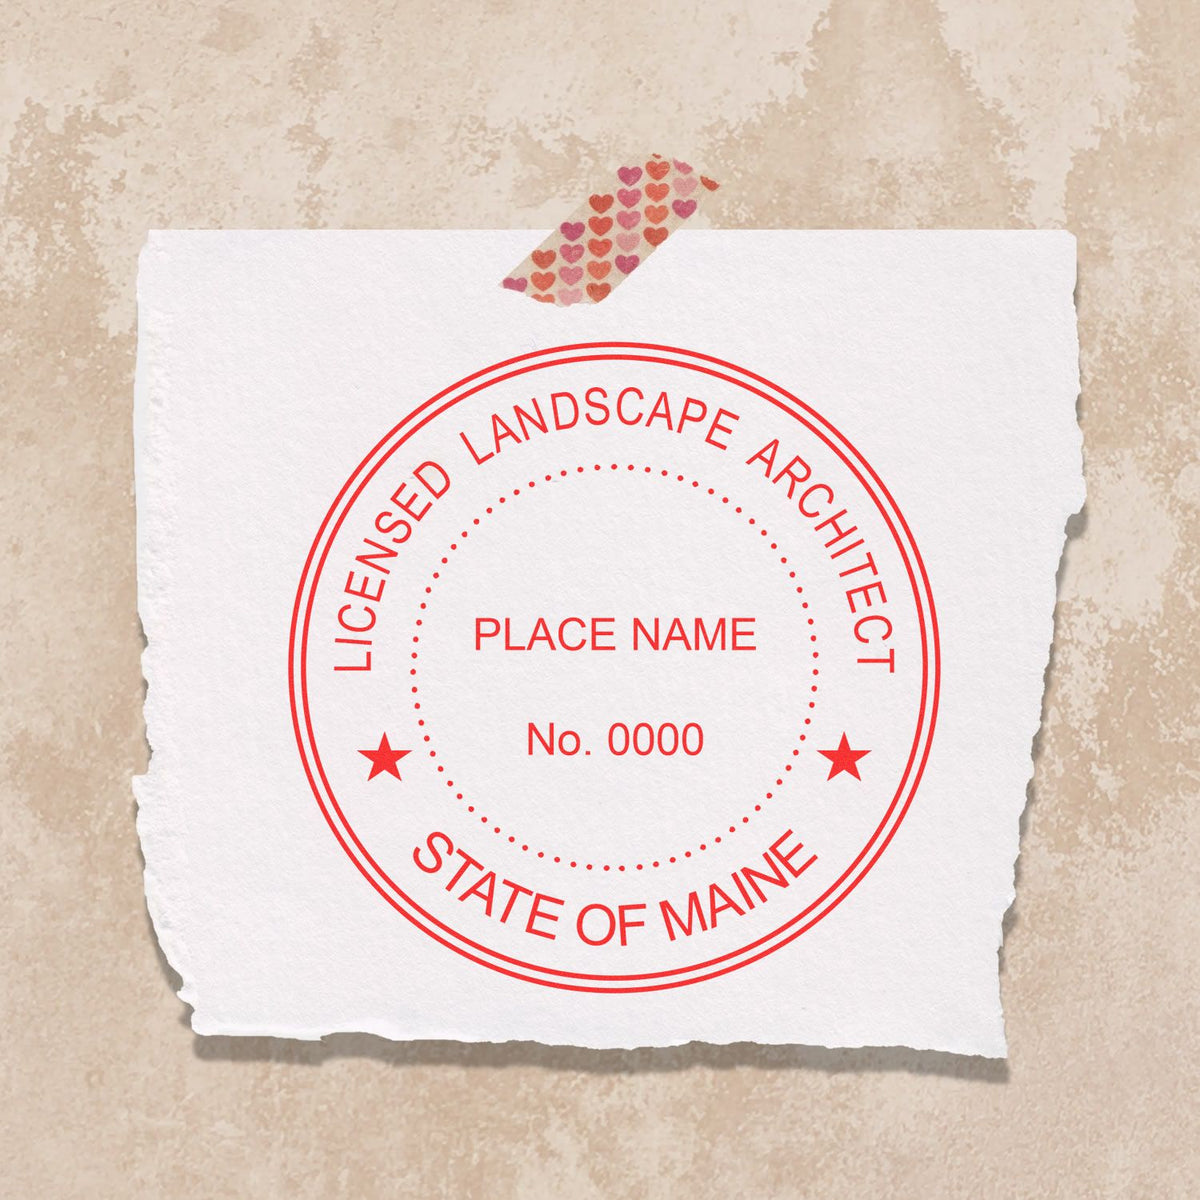 An alternative view of the Slim Pre-Inked Maine Landscape Architect Seal Stamp stamped on a sheet of paper showing the image in use